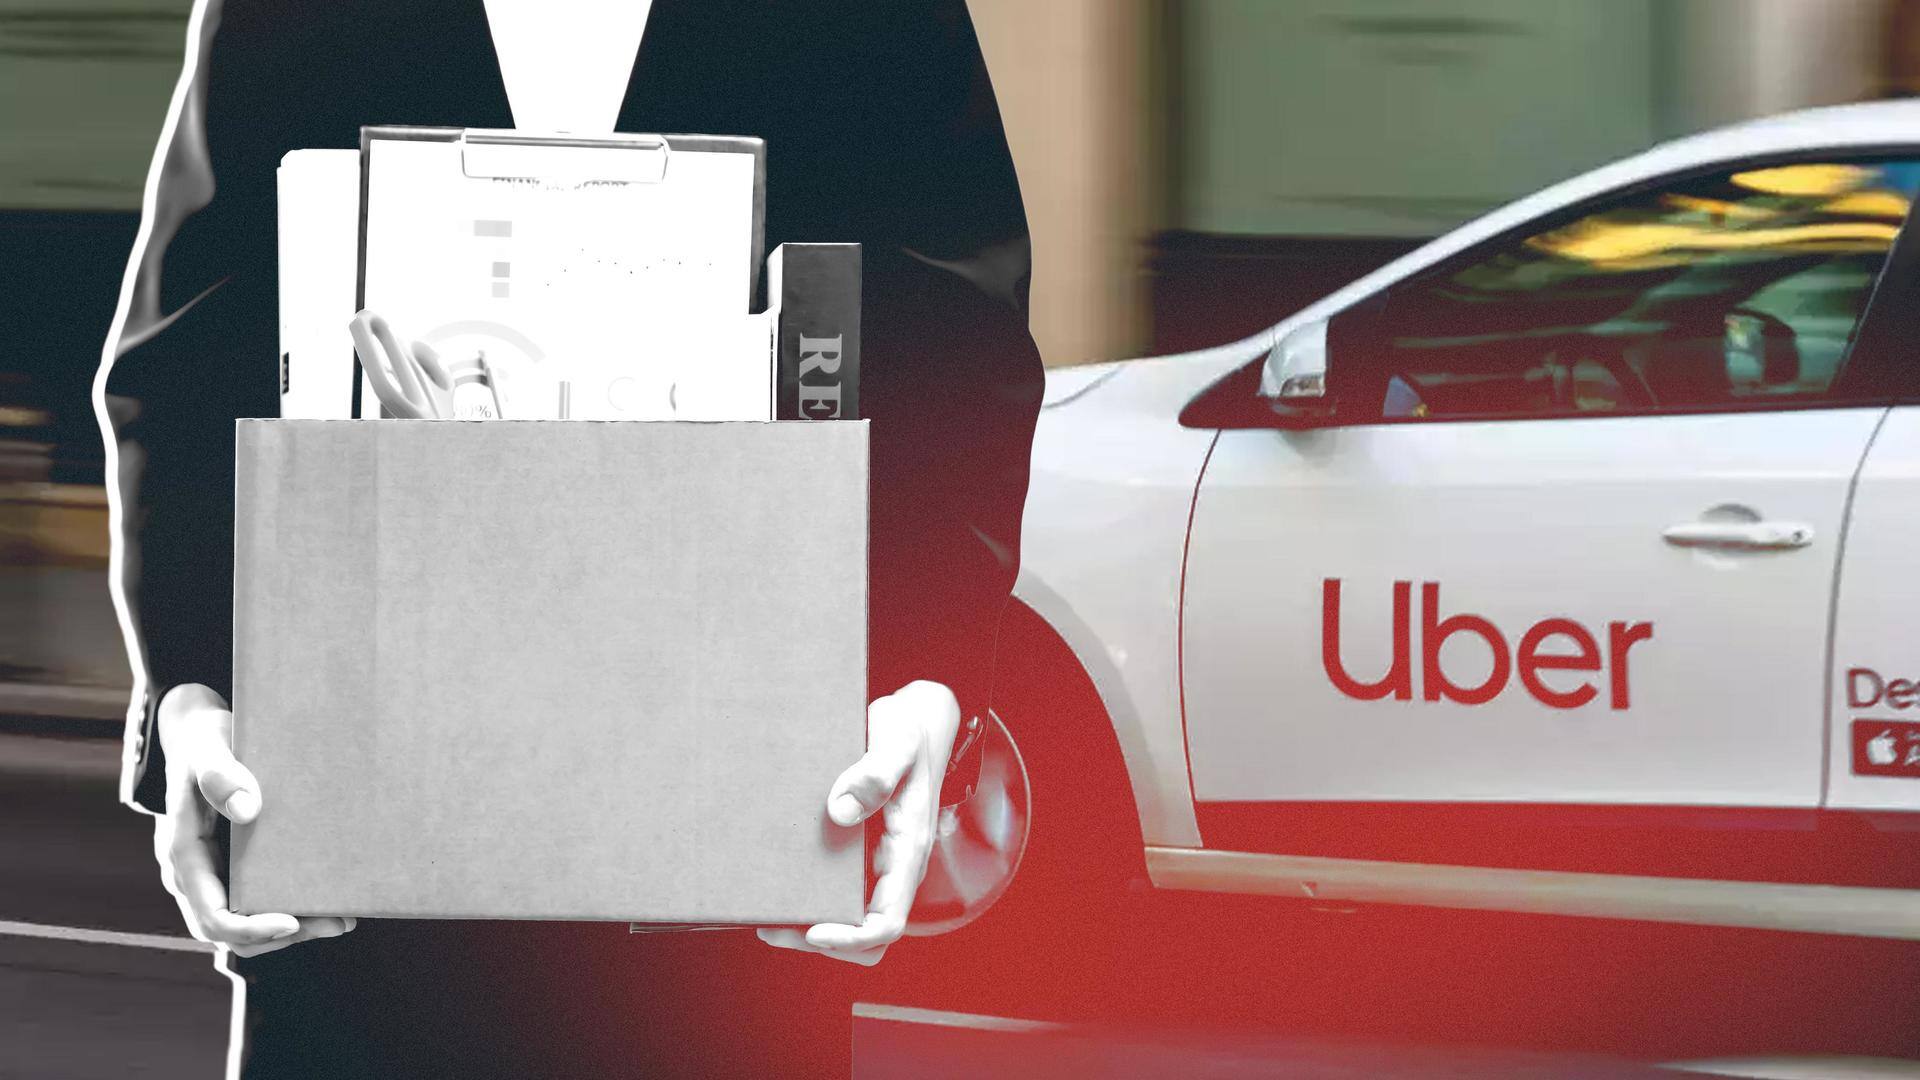 Uber's 'rigorous' performance review system could see employees getting fired